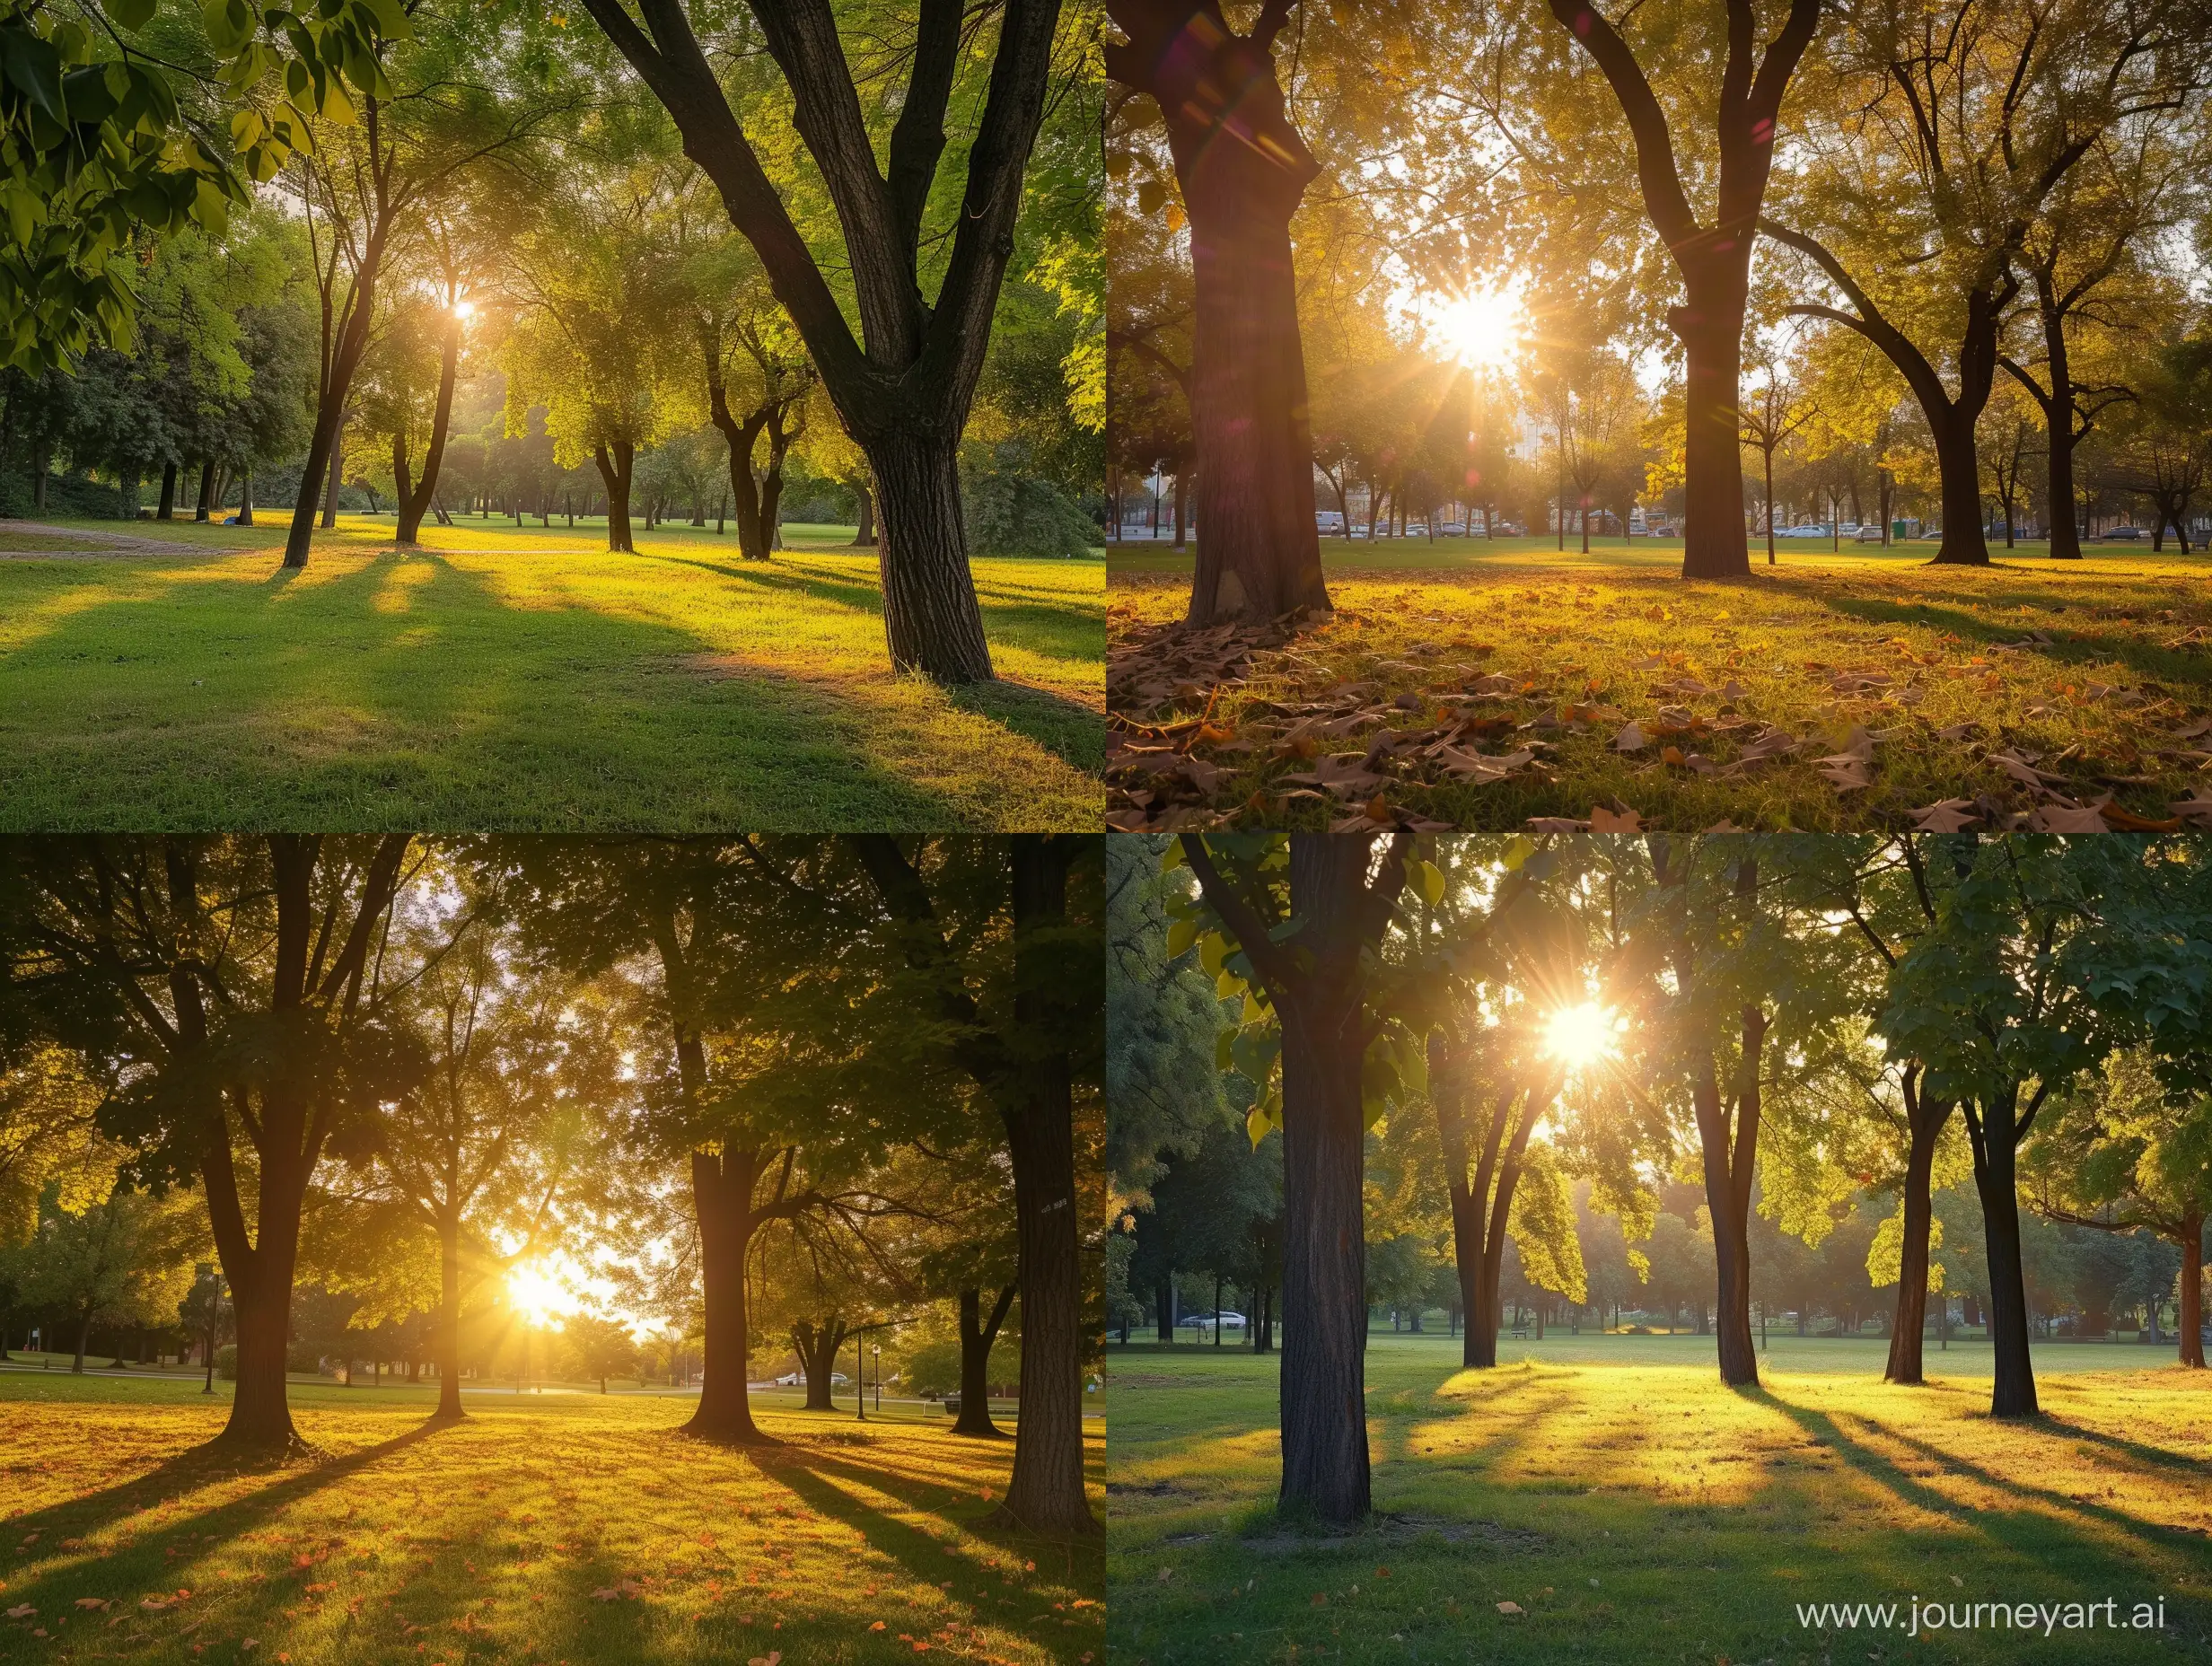 Sunset-Radiance-in-Park-with-Trees-Captivating-Sunlight-Through-Leaves